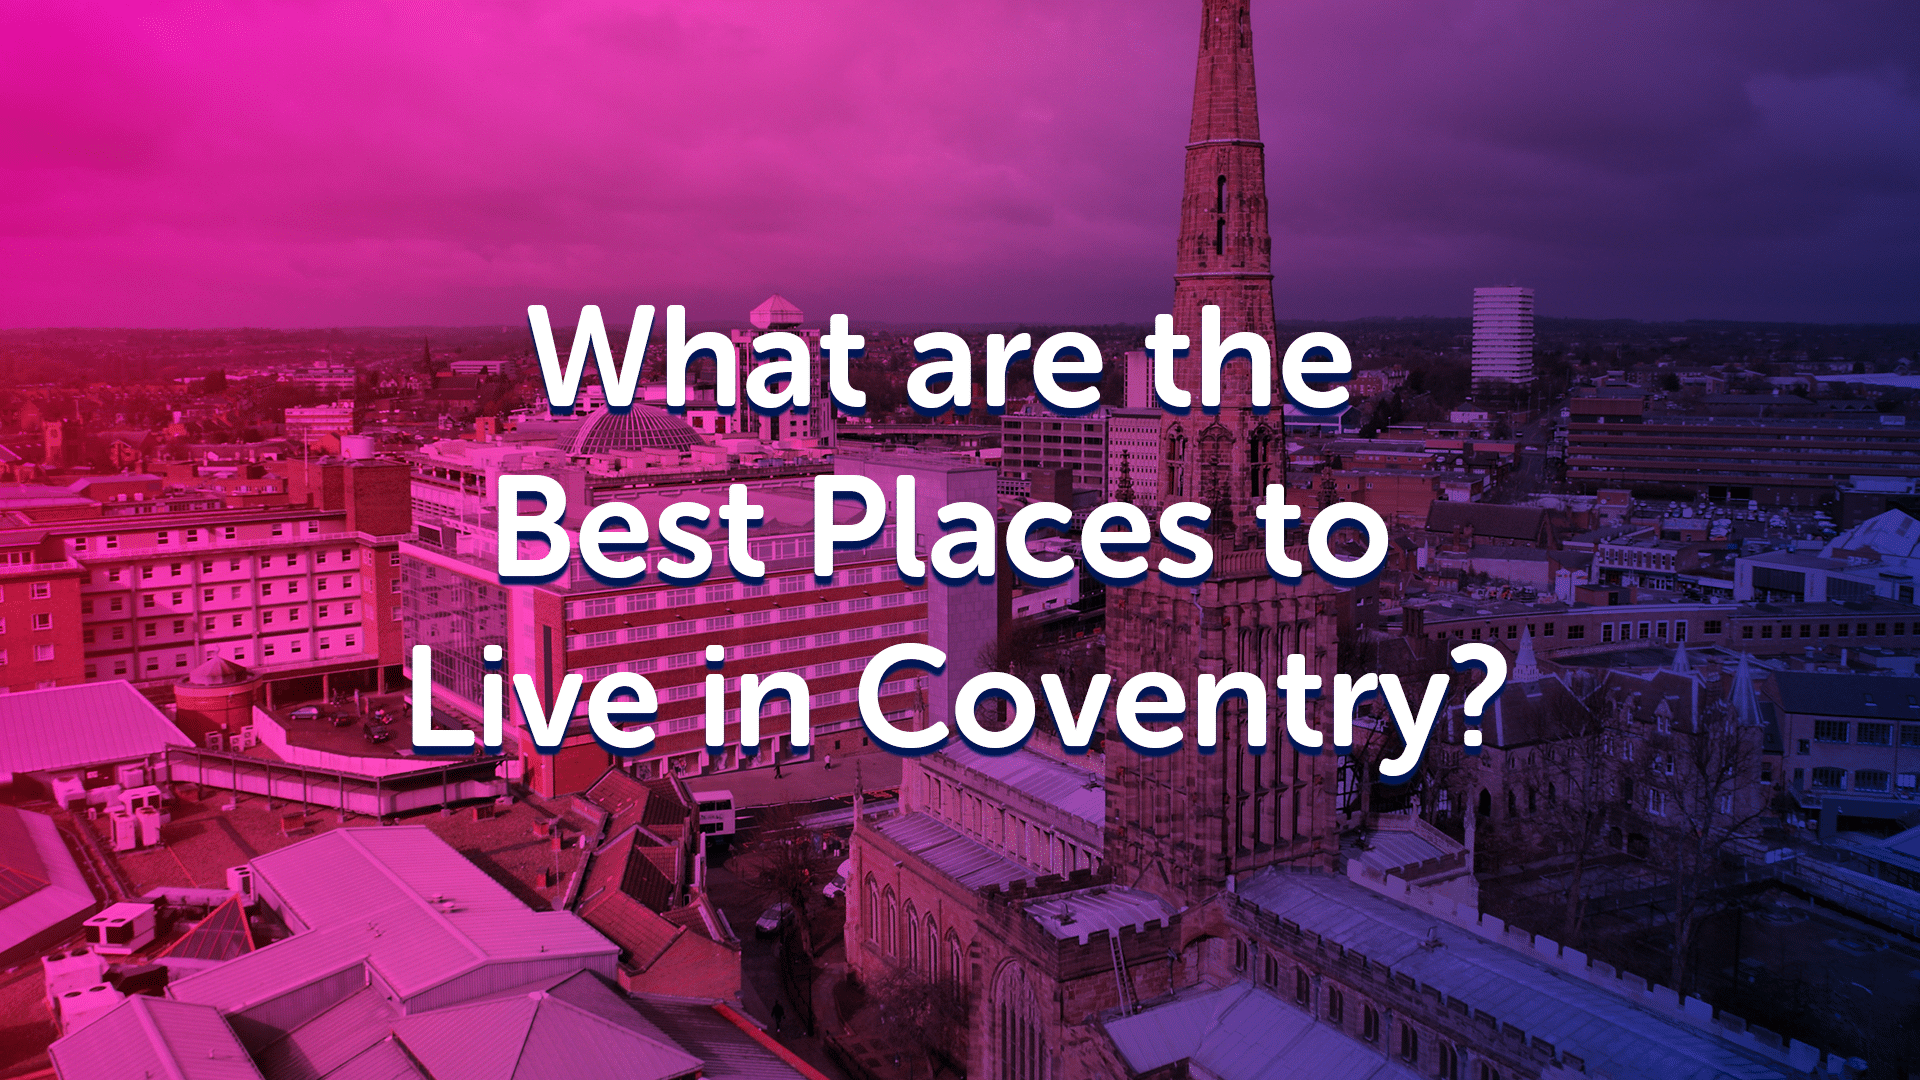 Best Places to Live in Coventry